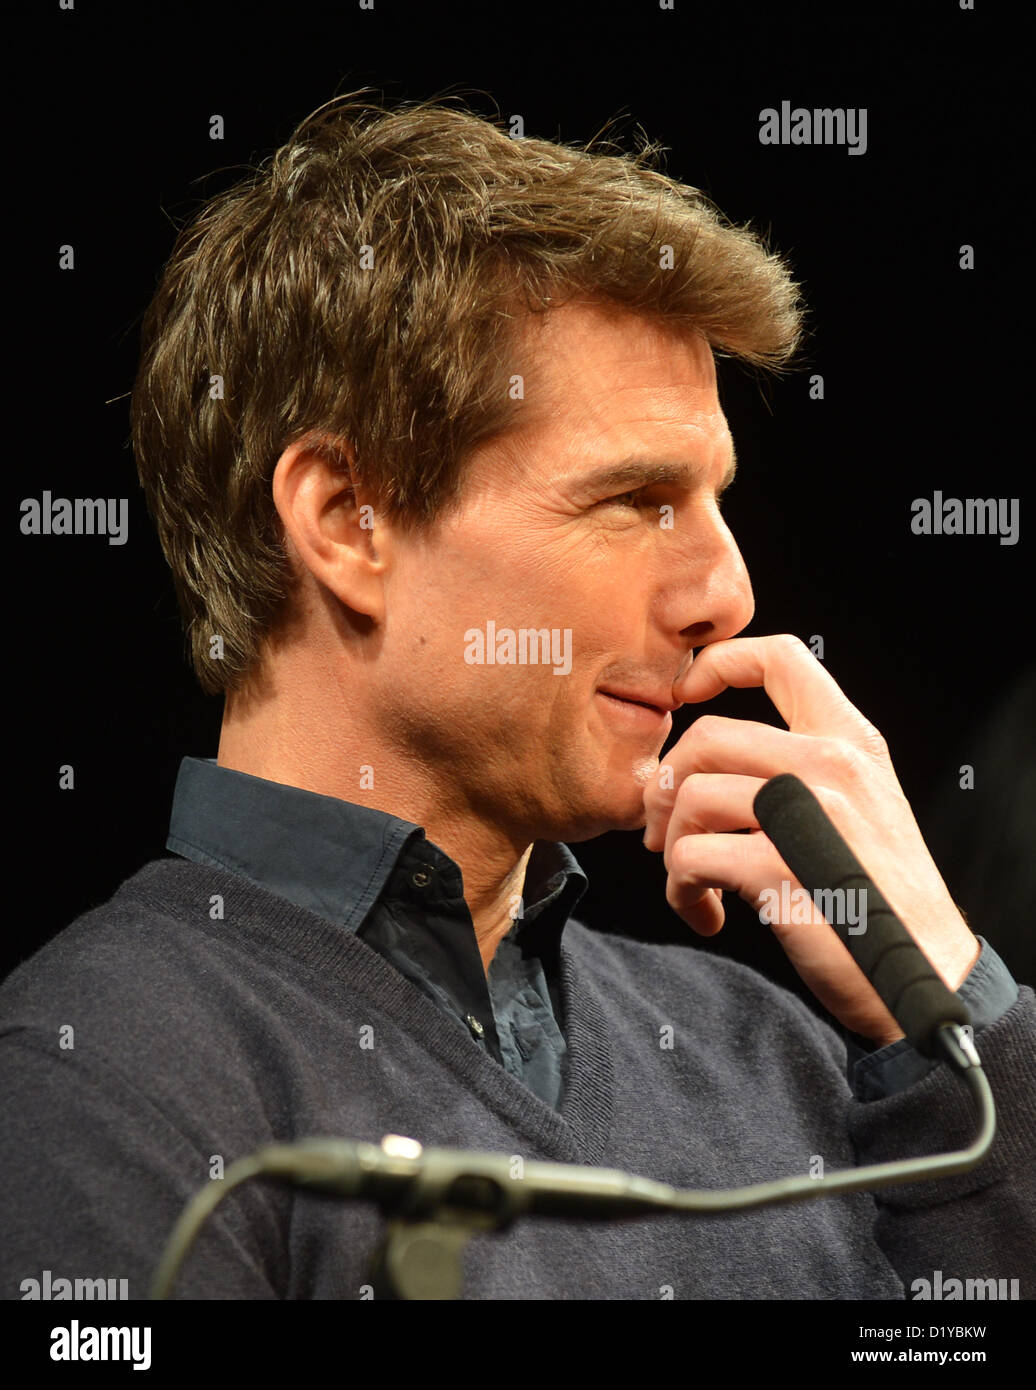 Tom Cruise, Jan 09, 2013 : Tokyo, Japan - American film star Tom Cruise  speaks during a news conference at a Tokyo hotel on Wednesday, January 9,  2013, promoting the premier of